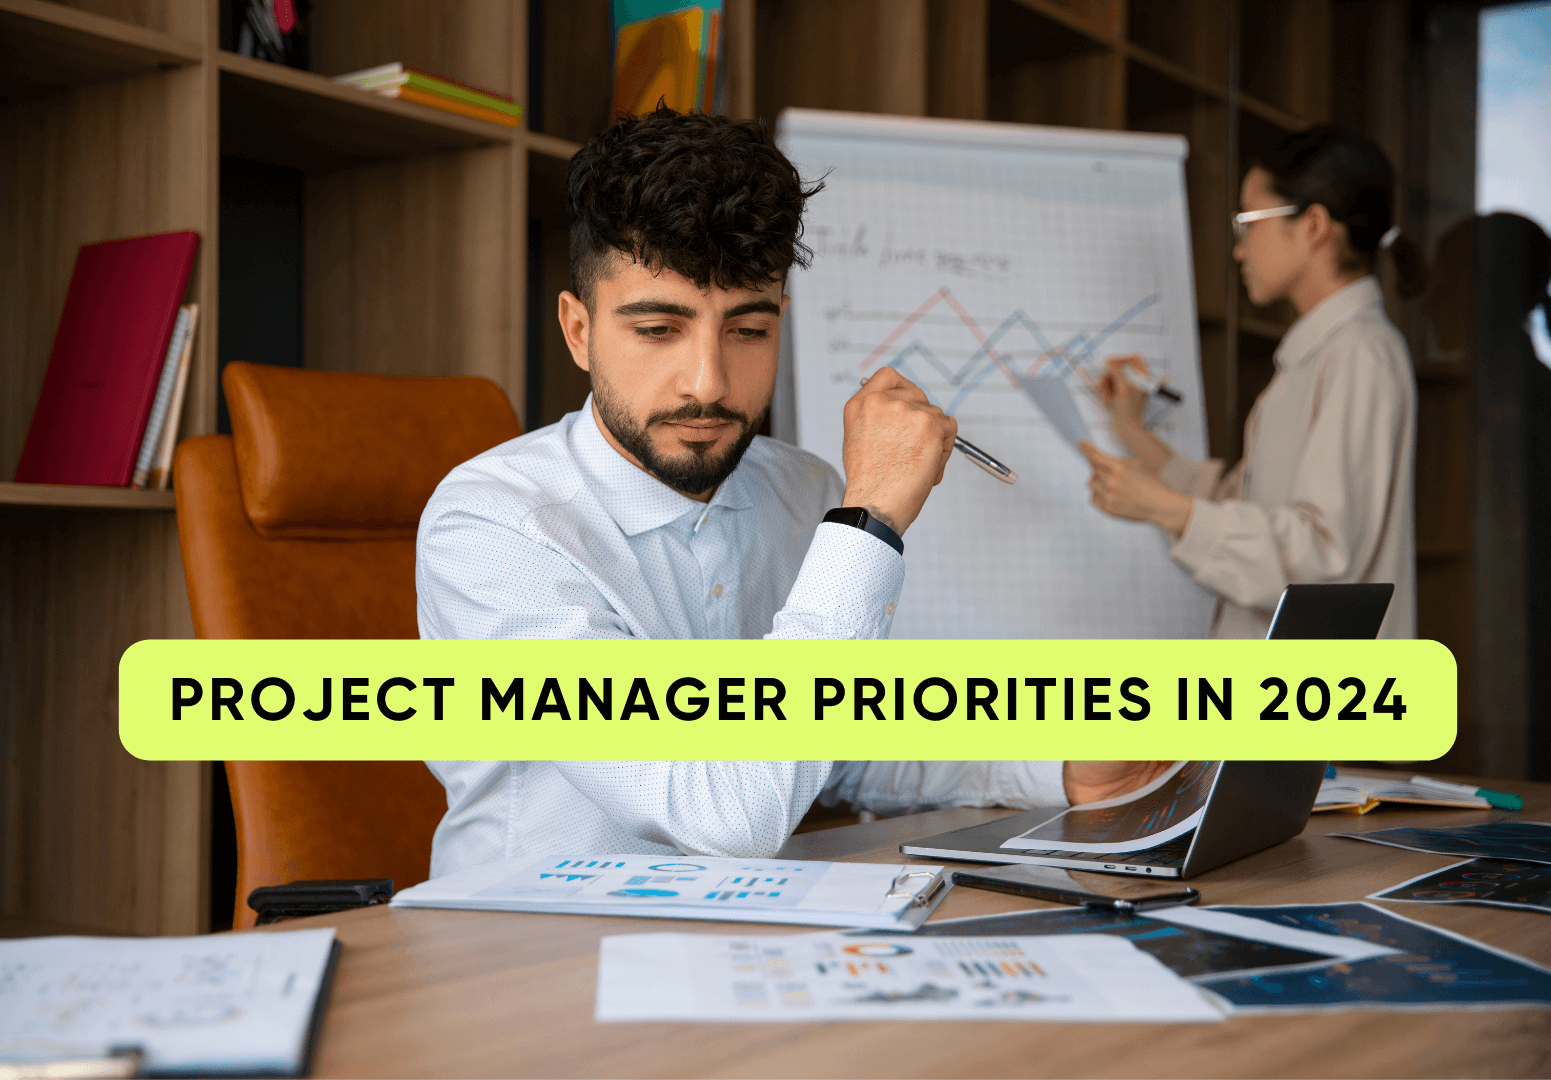 Project Managers, Project Managers Priorities